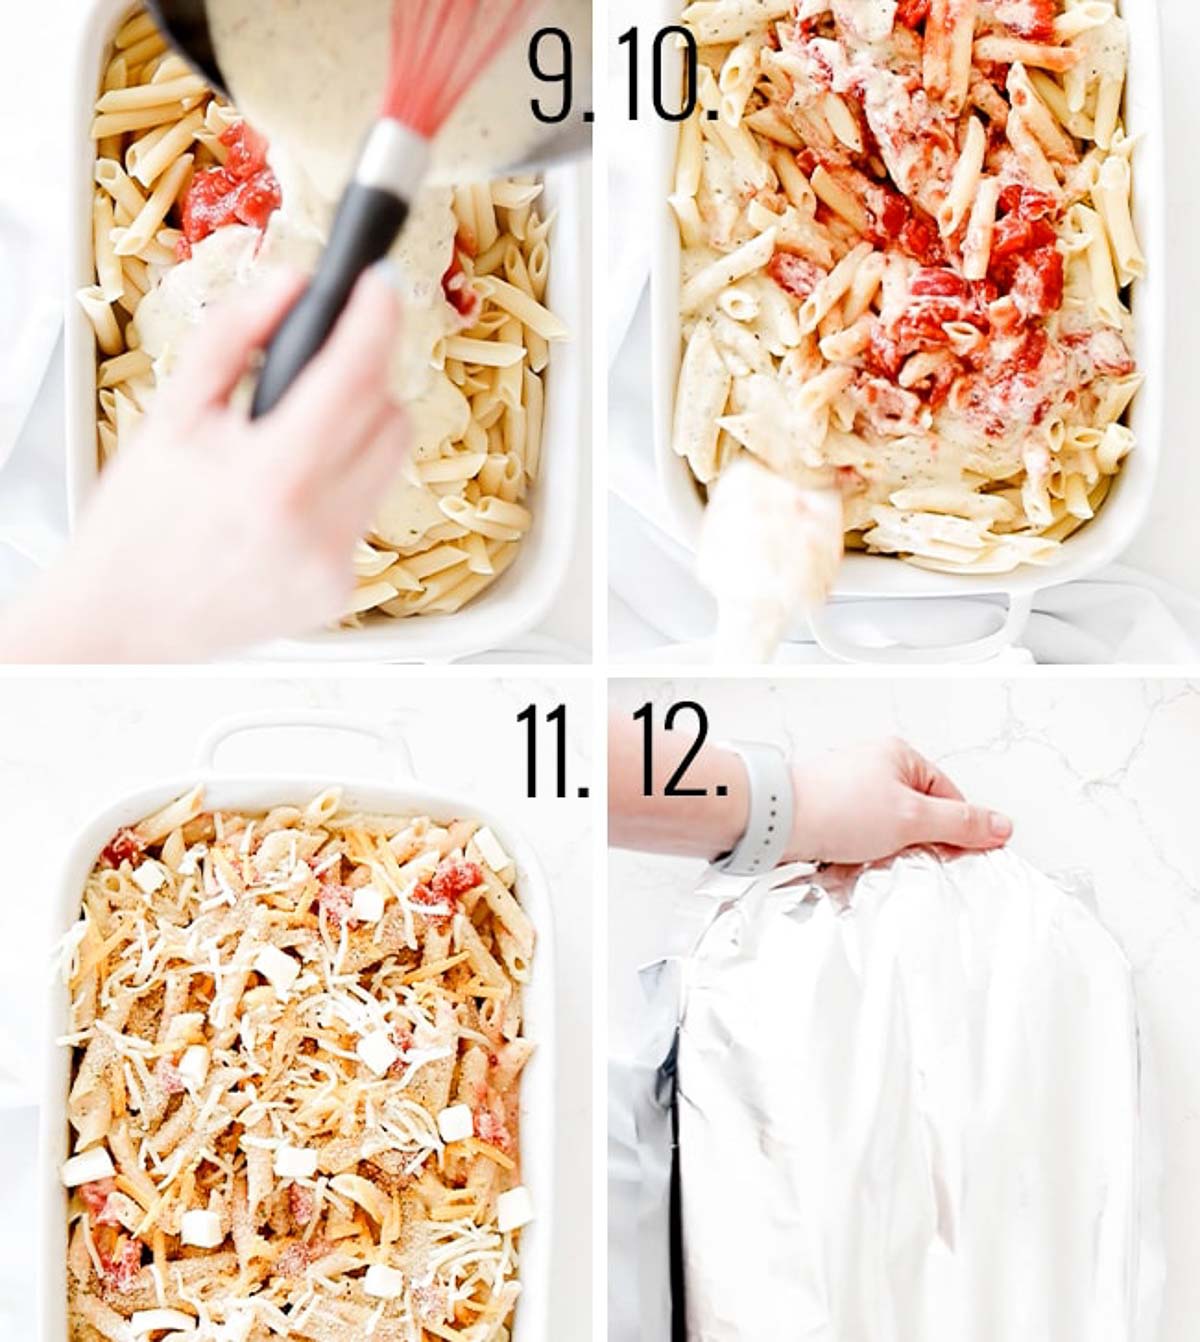 Collage of images showing the final steps in making italian pasta bake.